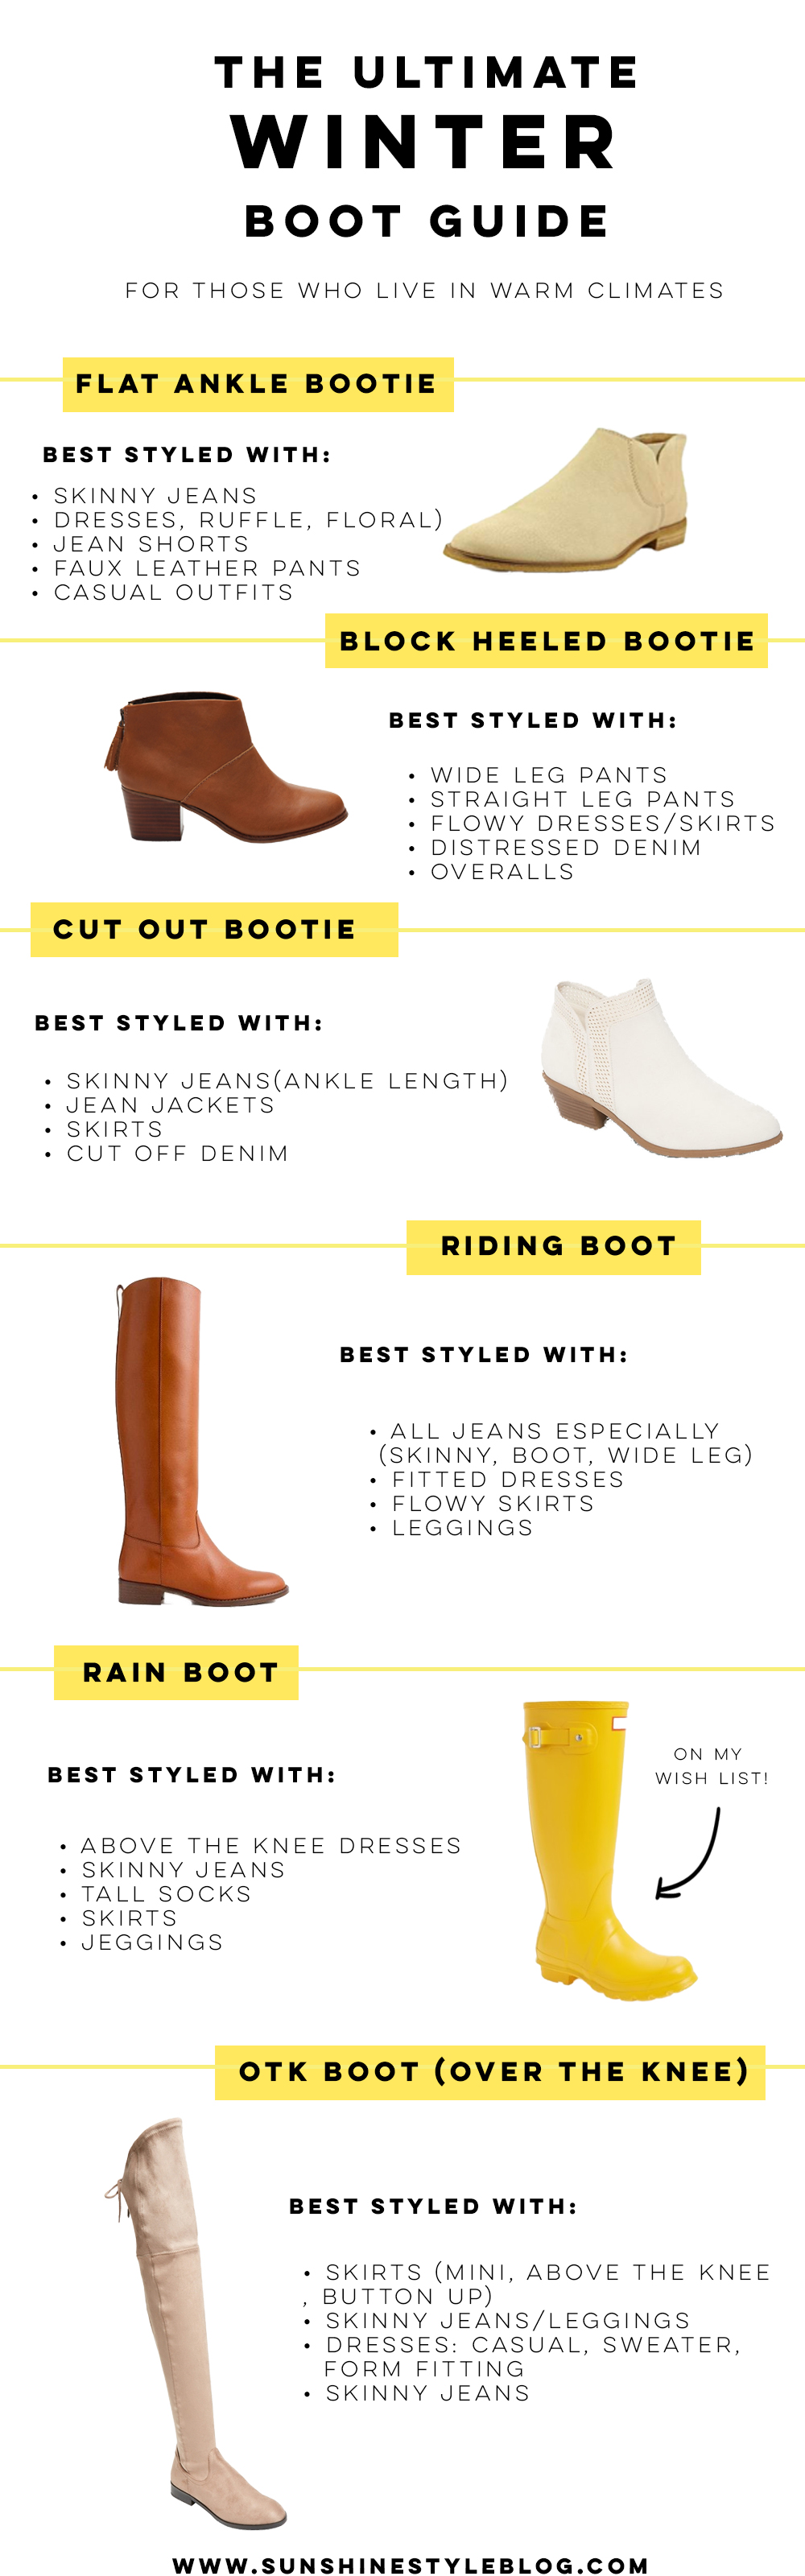 The Ultimate Winter Boot Guide: How to Wear and Style Boots in the Winter + Winter Outfit Ideas